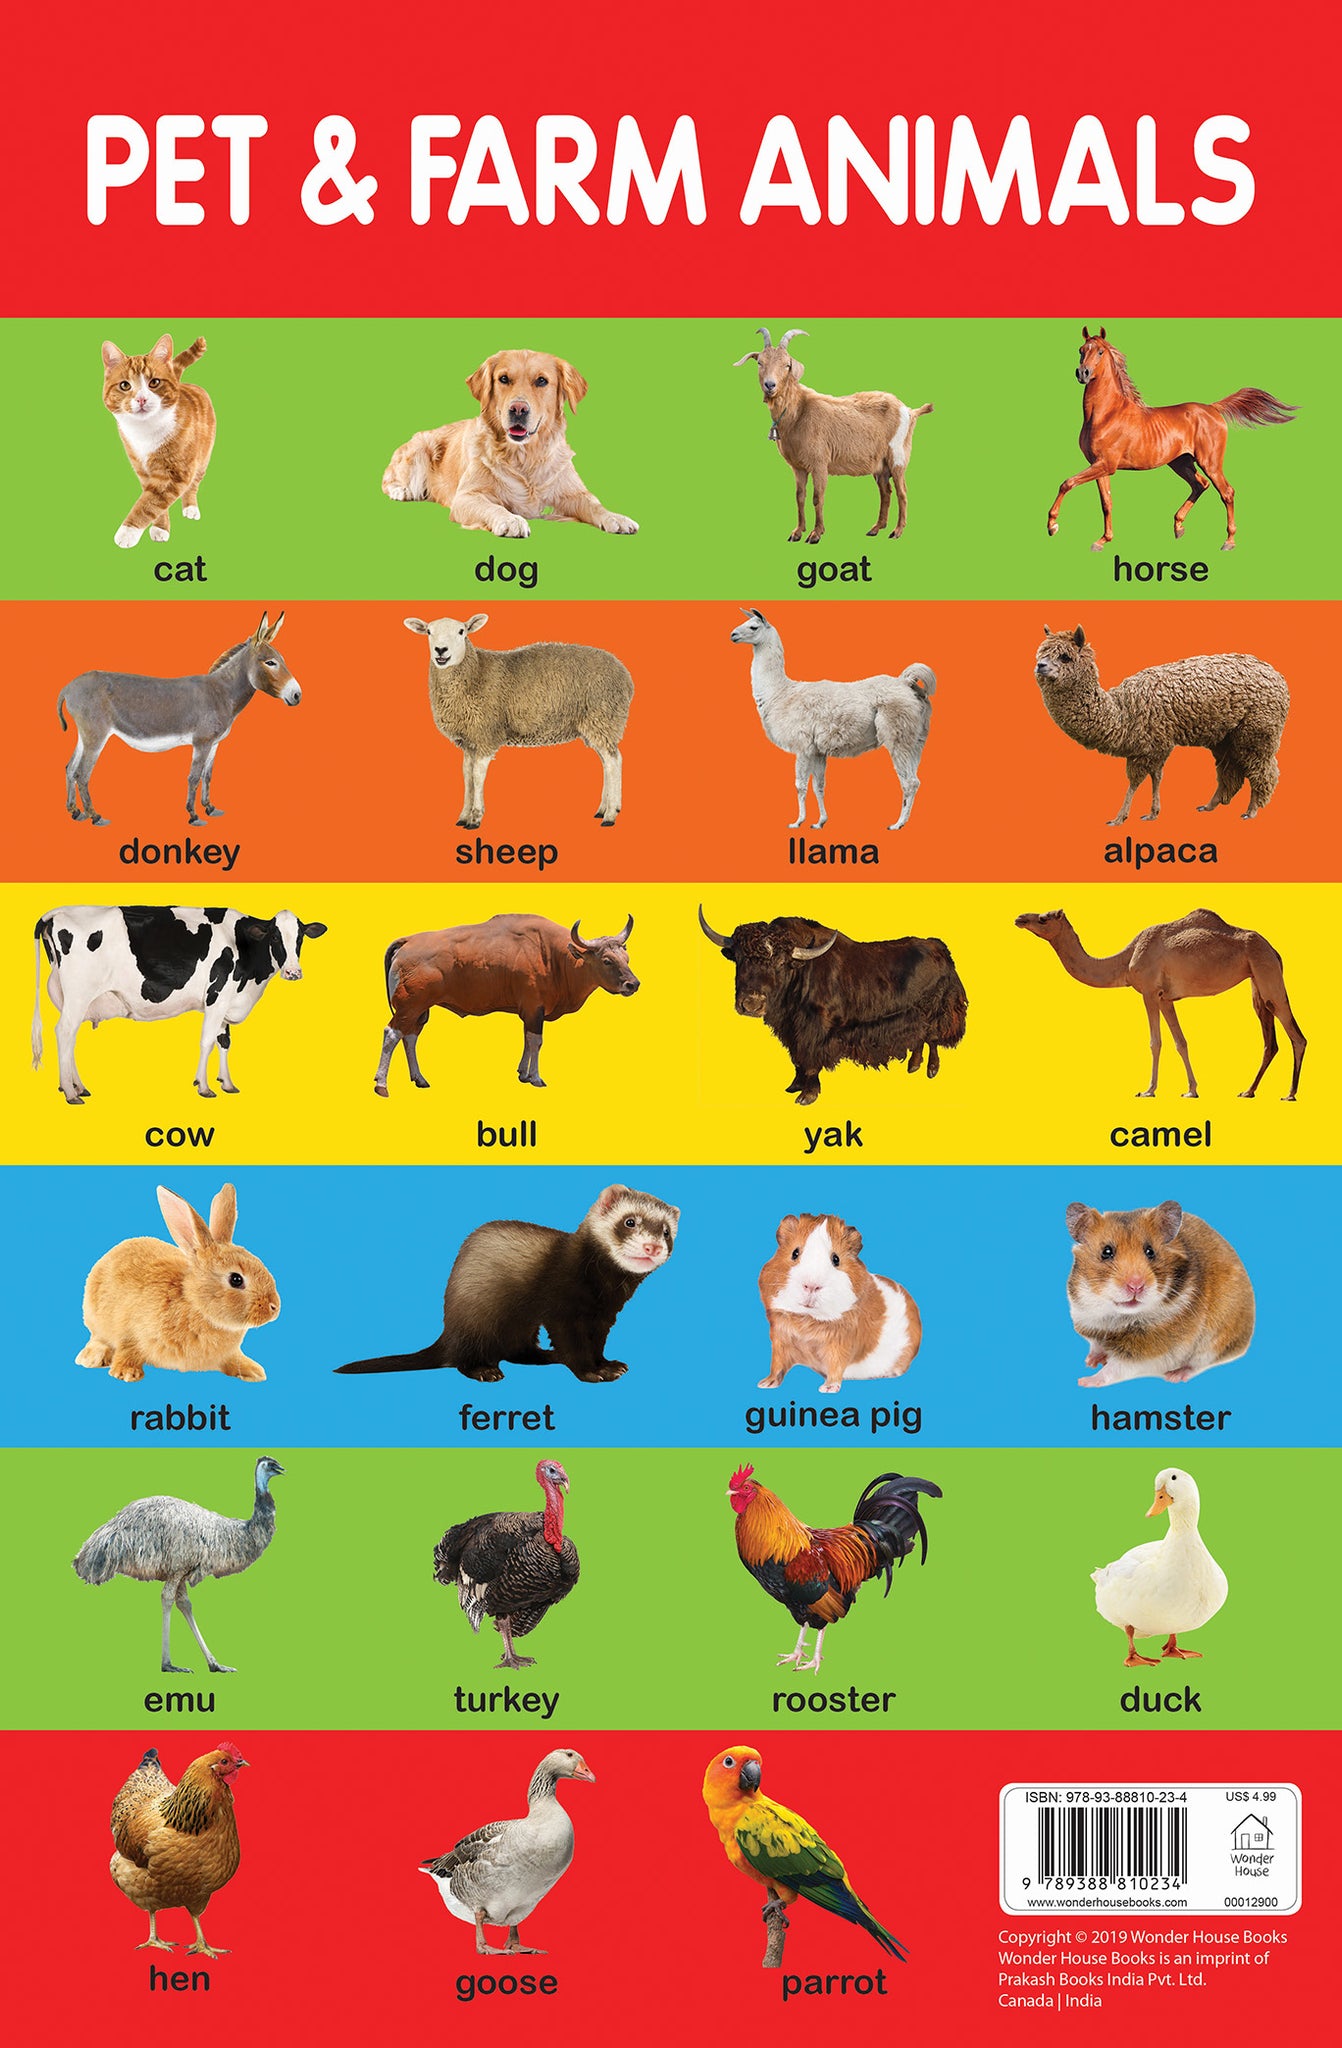 Pet & Farm Animals - Early Learning Educational Posters For Children: Perfect For Kindergarten, Nursery and Homeschooling (19 Inches X 29 Inches)